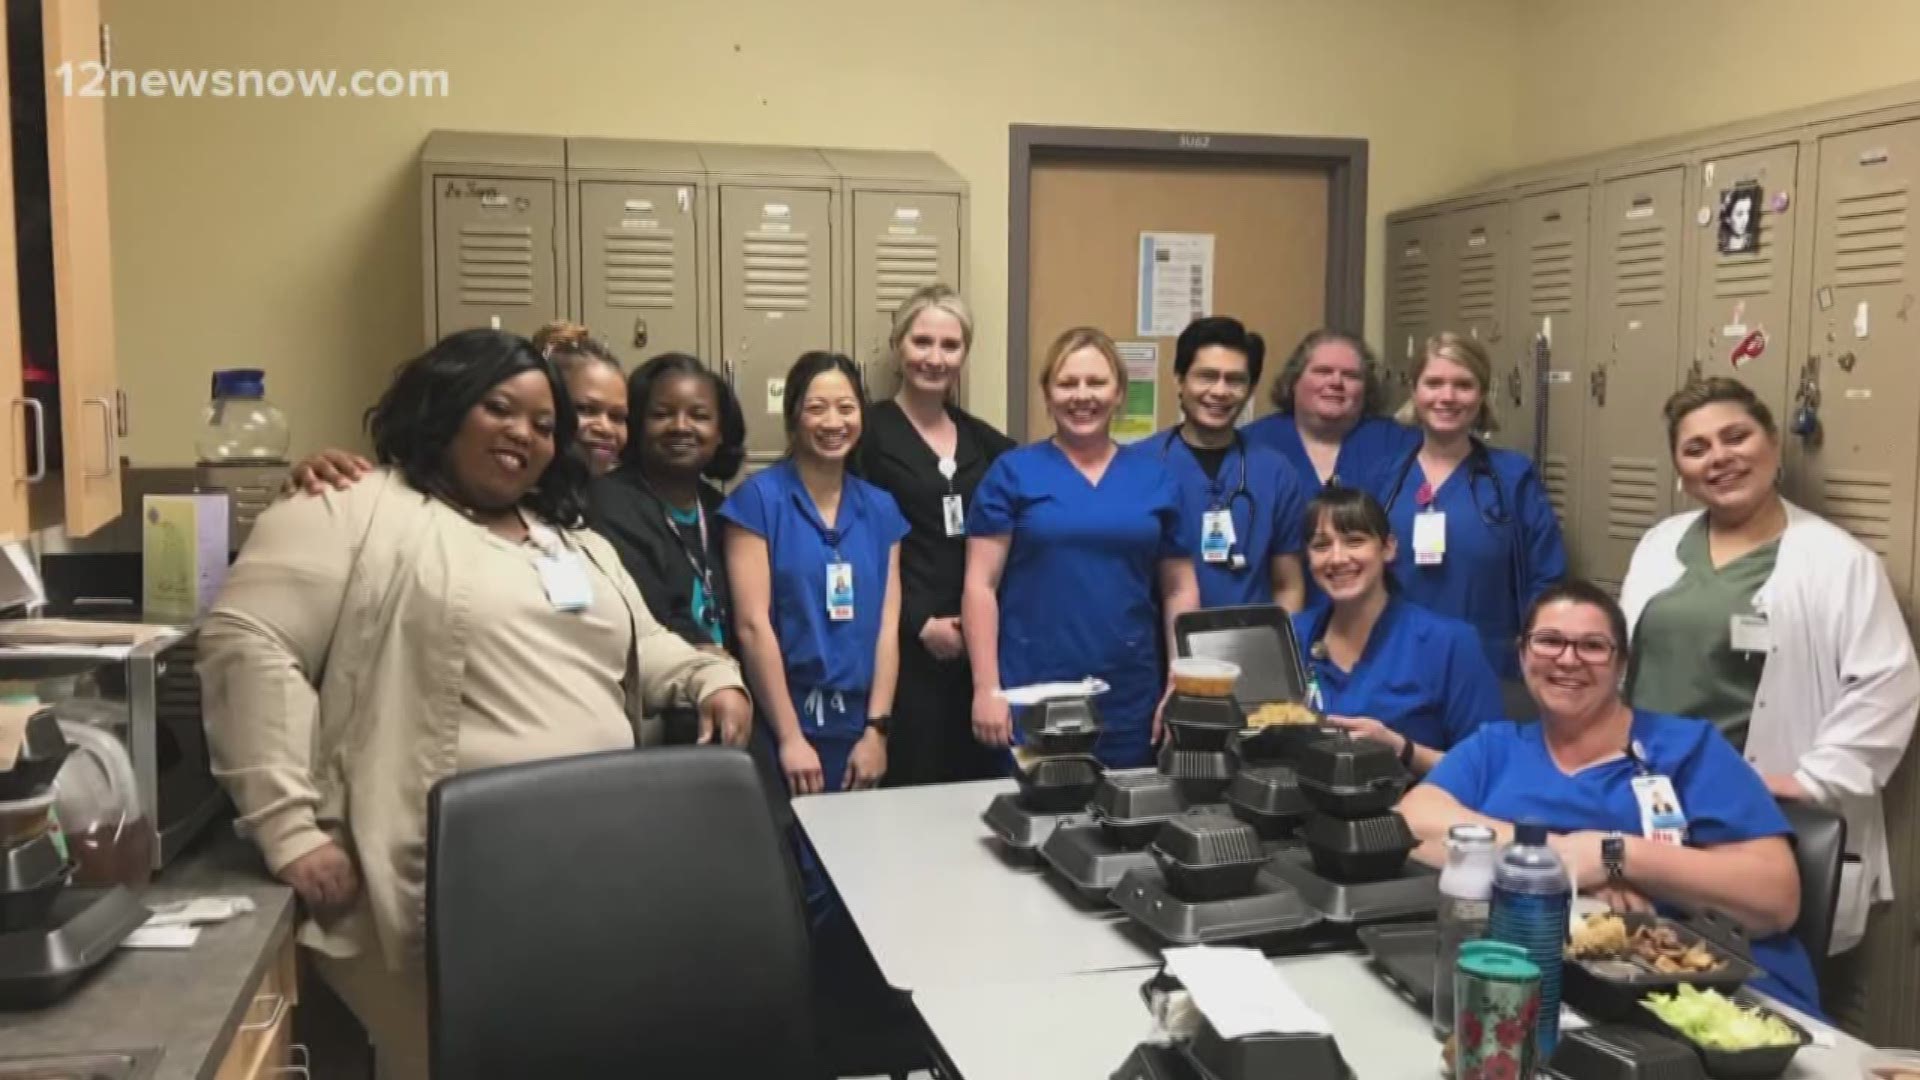 100 meals were dropped off at Baptist Hospital